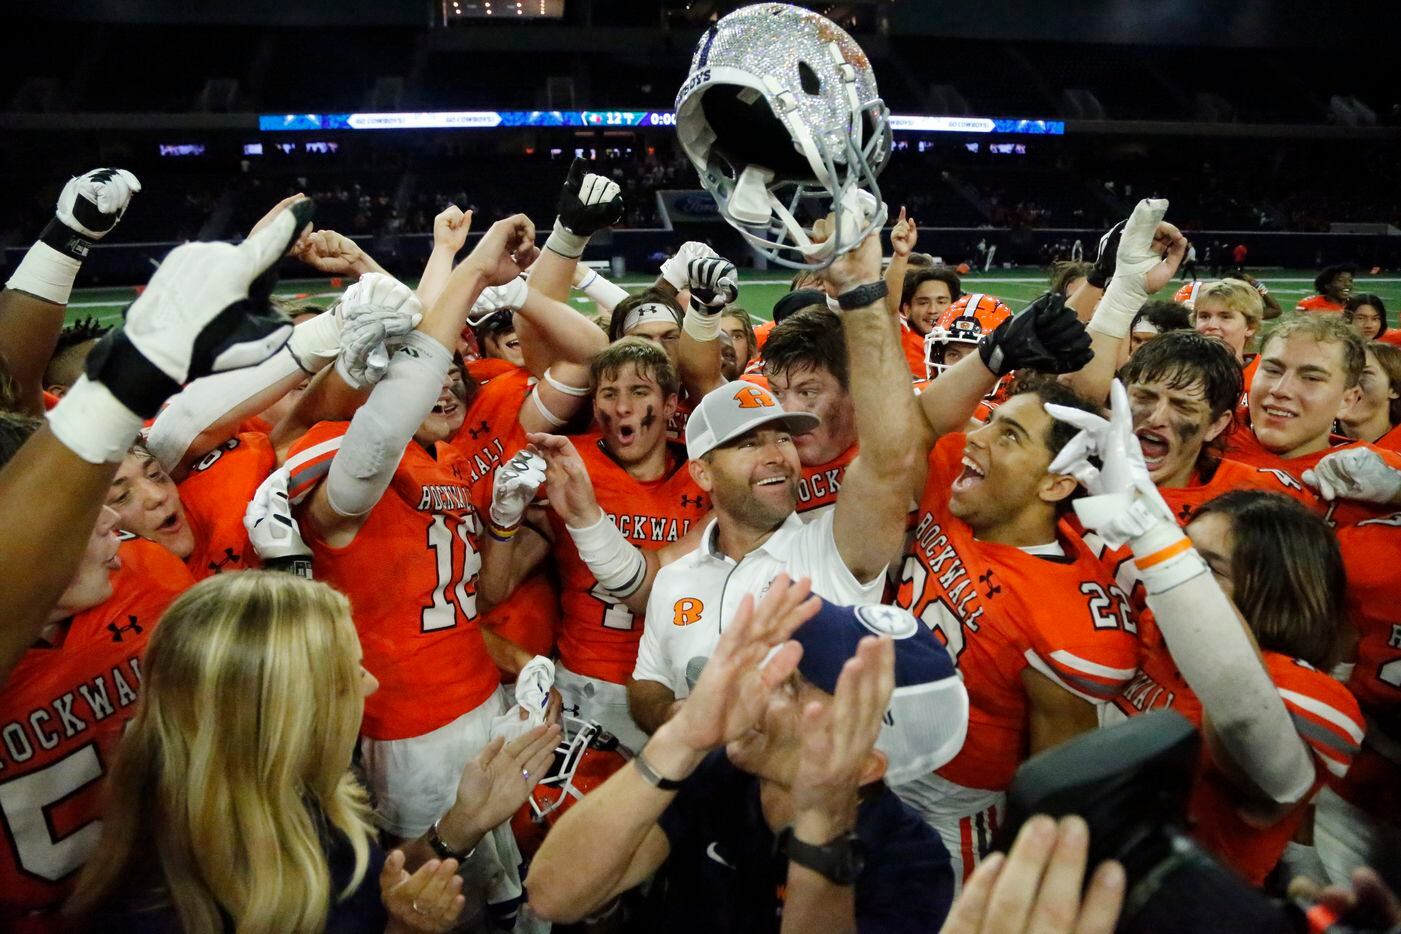 Surrounded by his team, Rockwall High School head coach Trey Brooks holds up the trophy for...